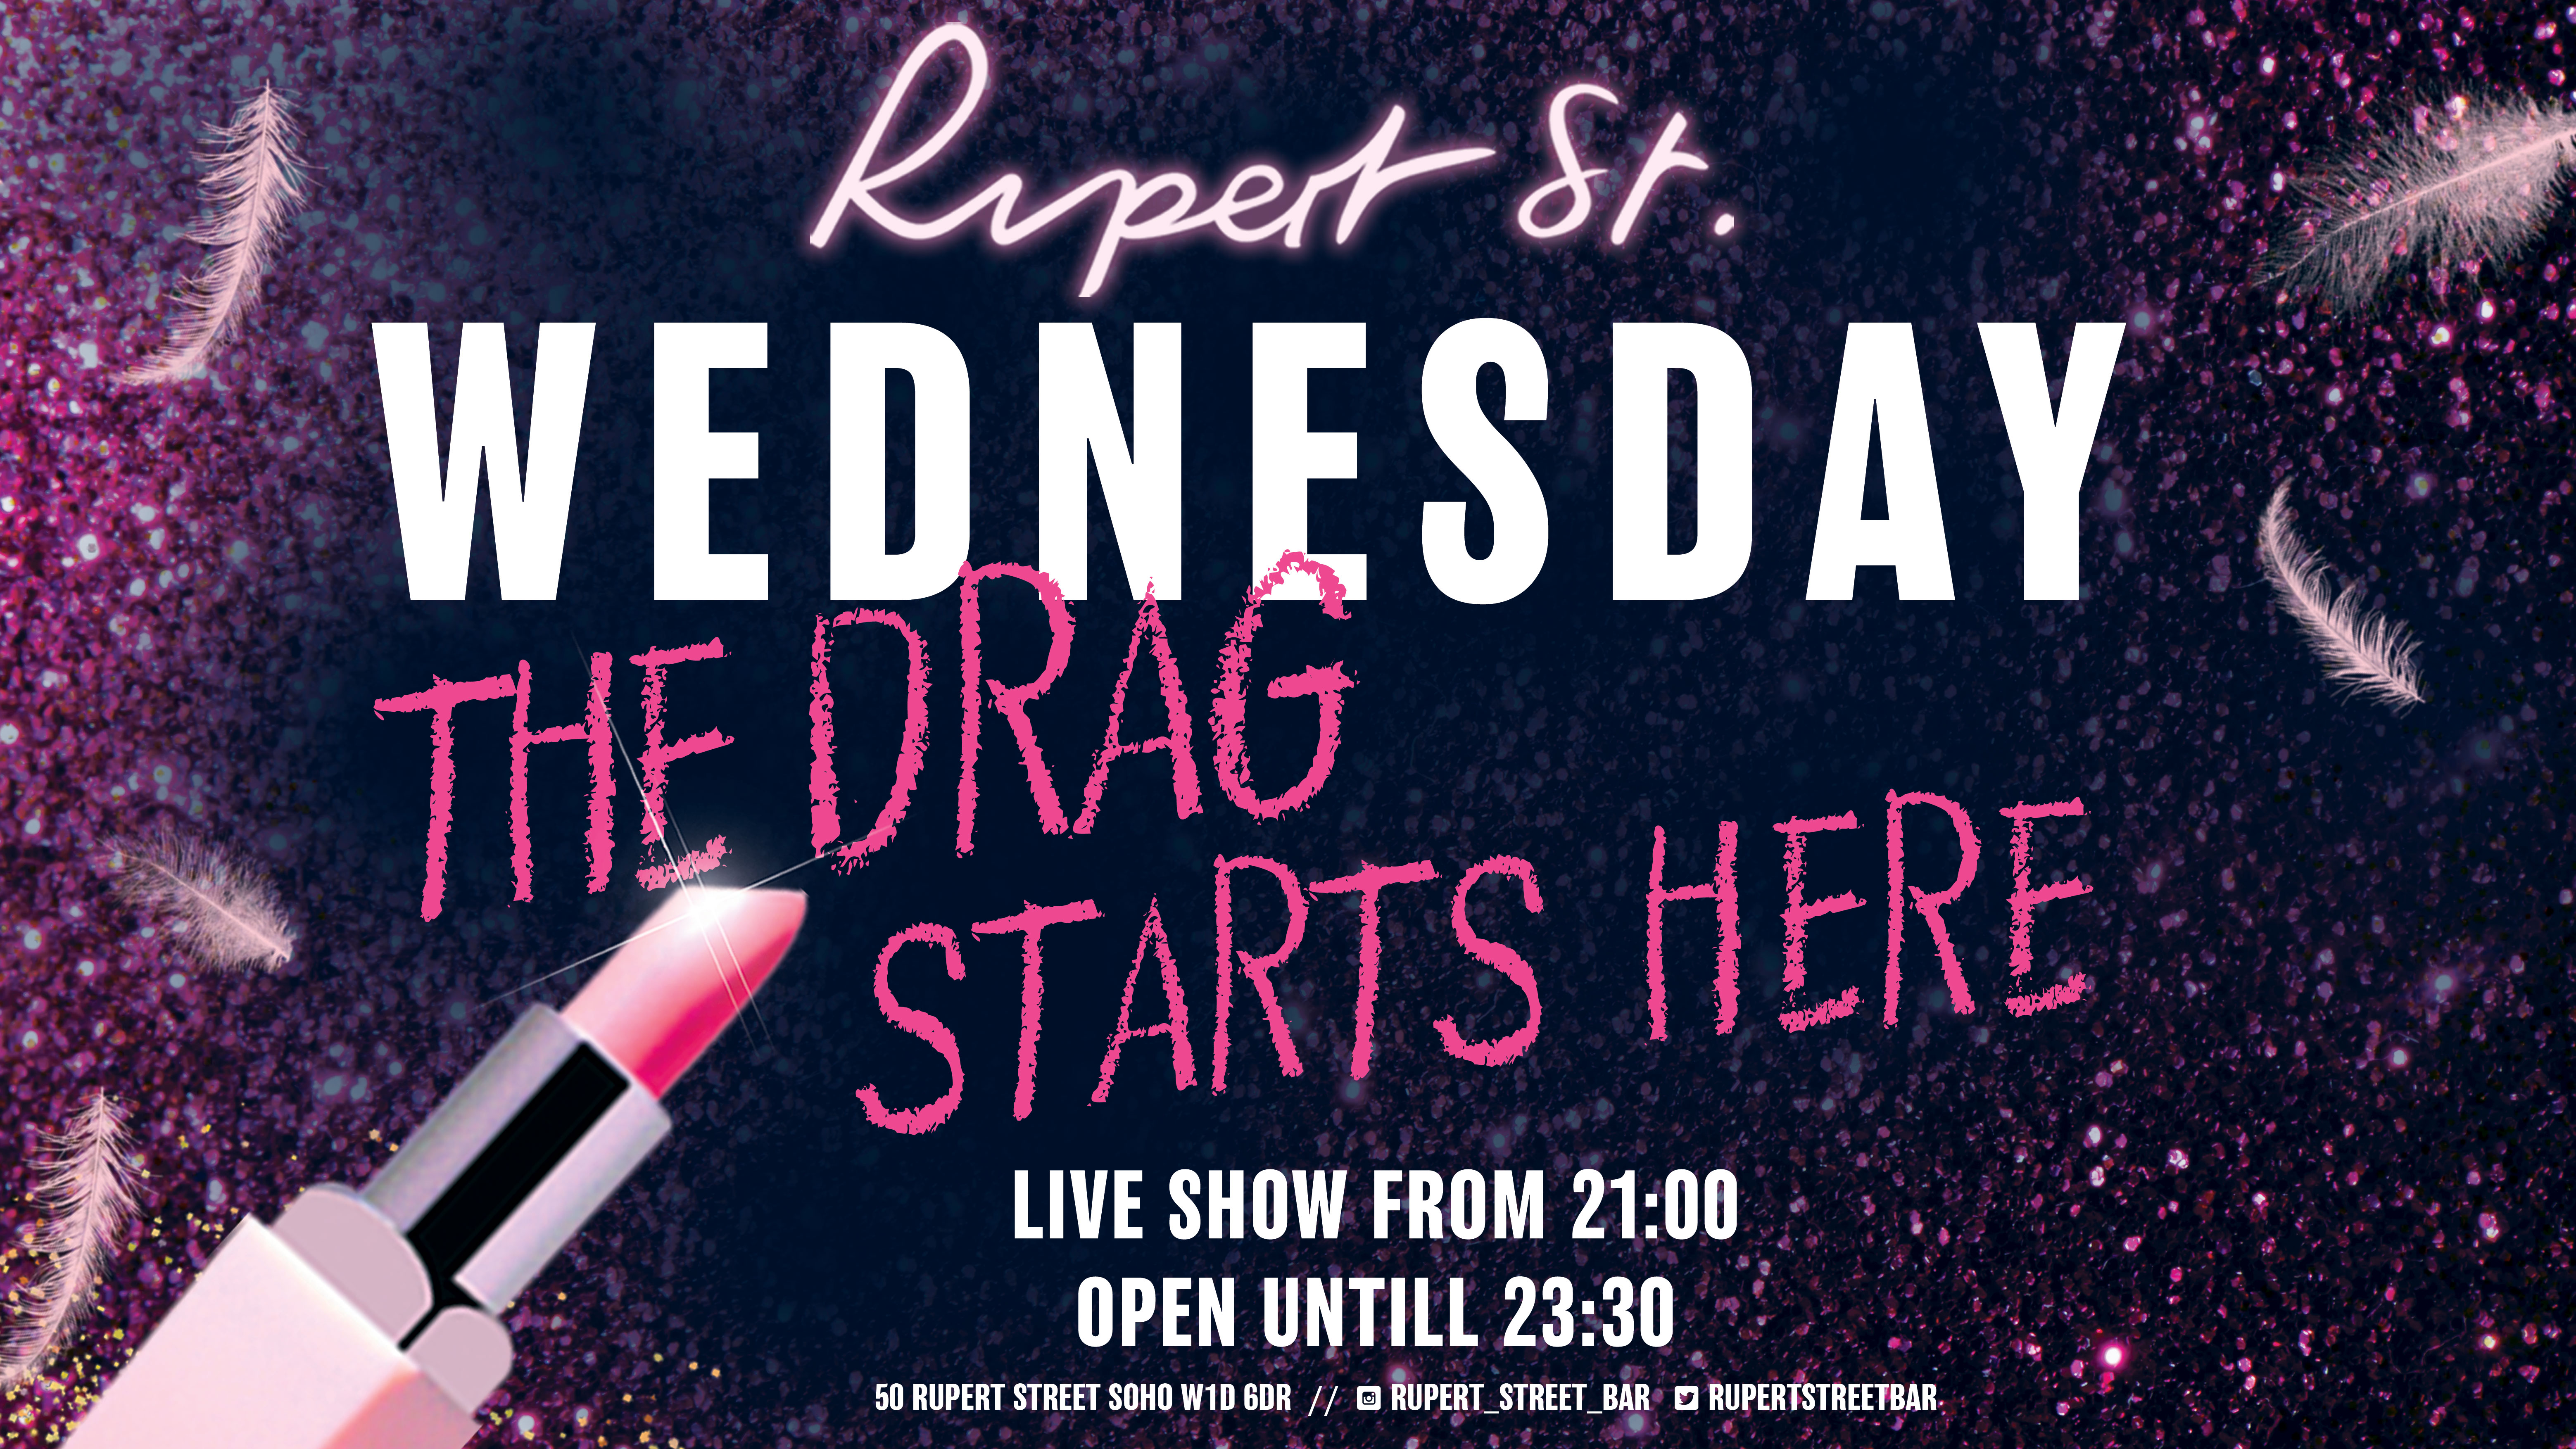 Wednesday the drag starts here